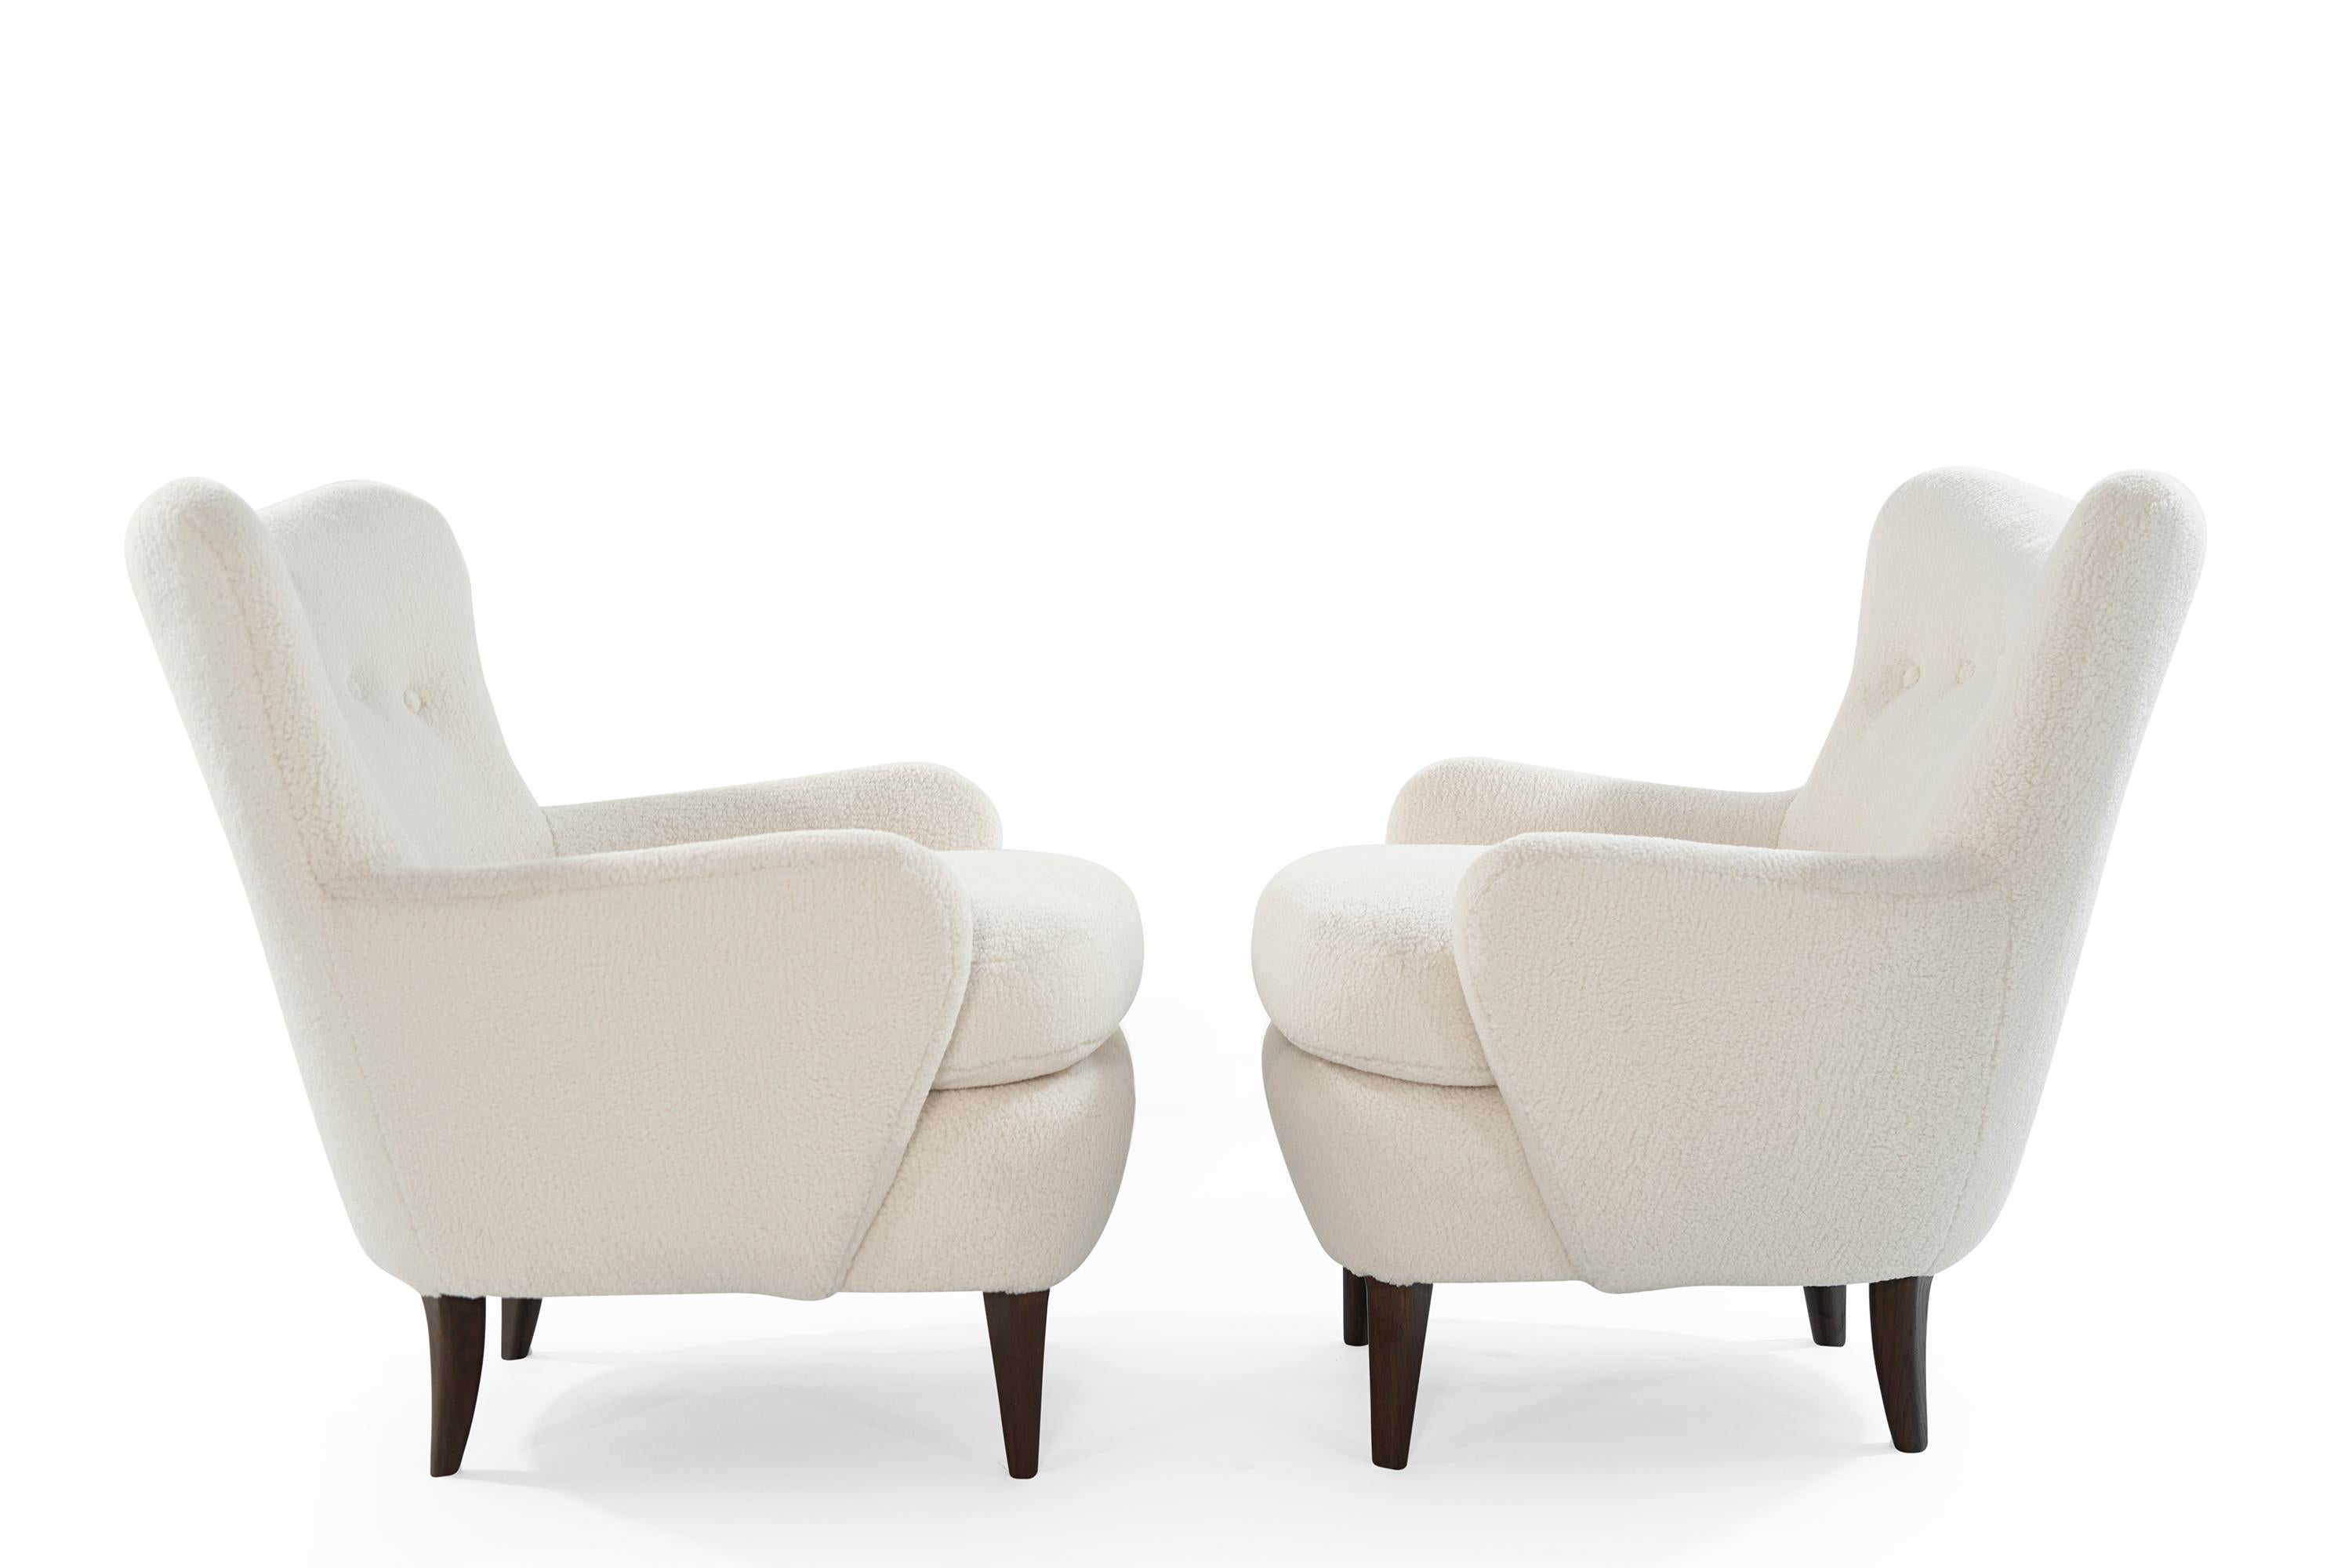 A rare set of lounge chairs by the distinguished Austrian architect and interior designer Ernst Schwadron, circa 1950s. 

The mahogany legs have been fully restored to their original espresso finish. Newly upholstered in plush wool by Kravet.